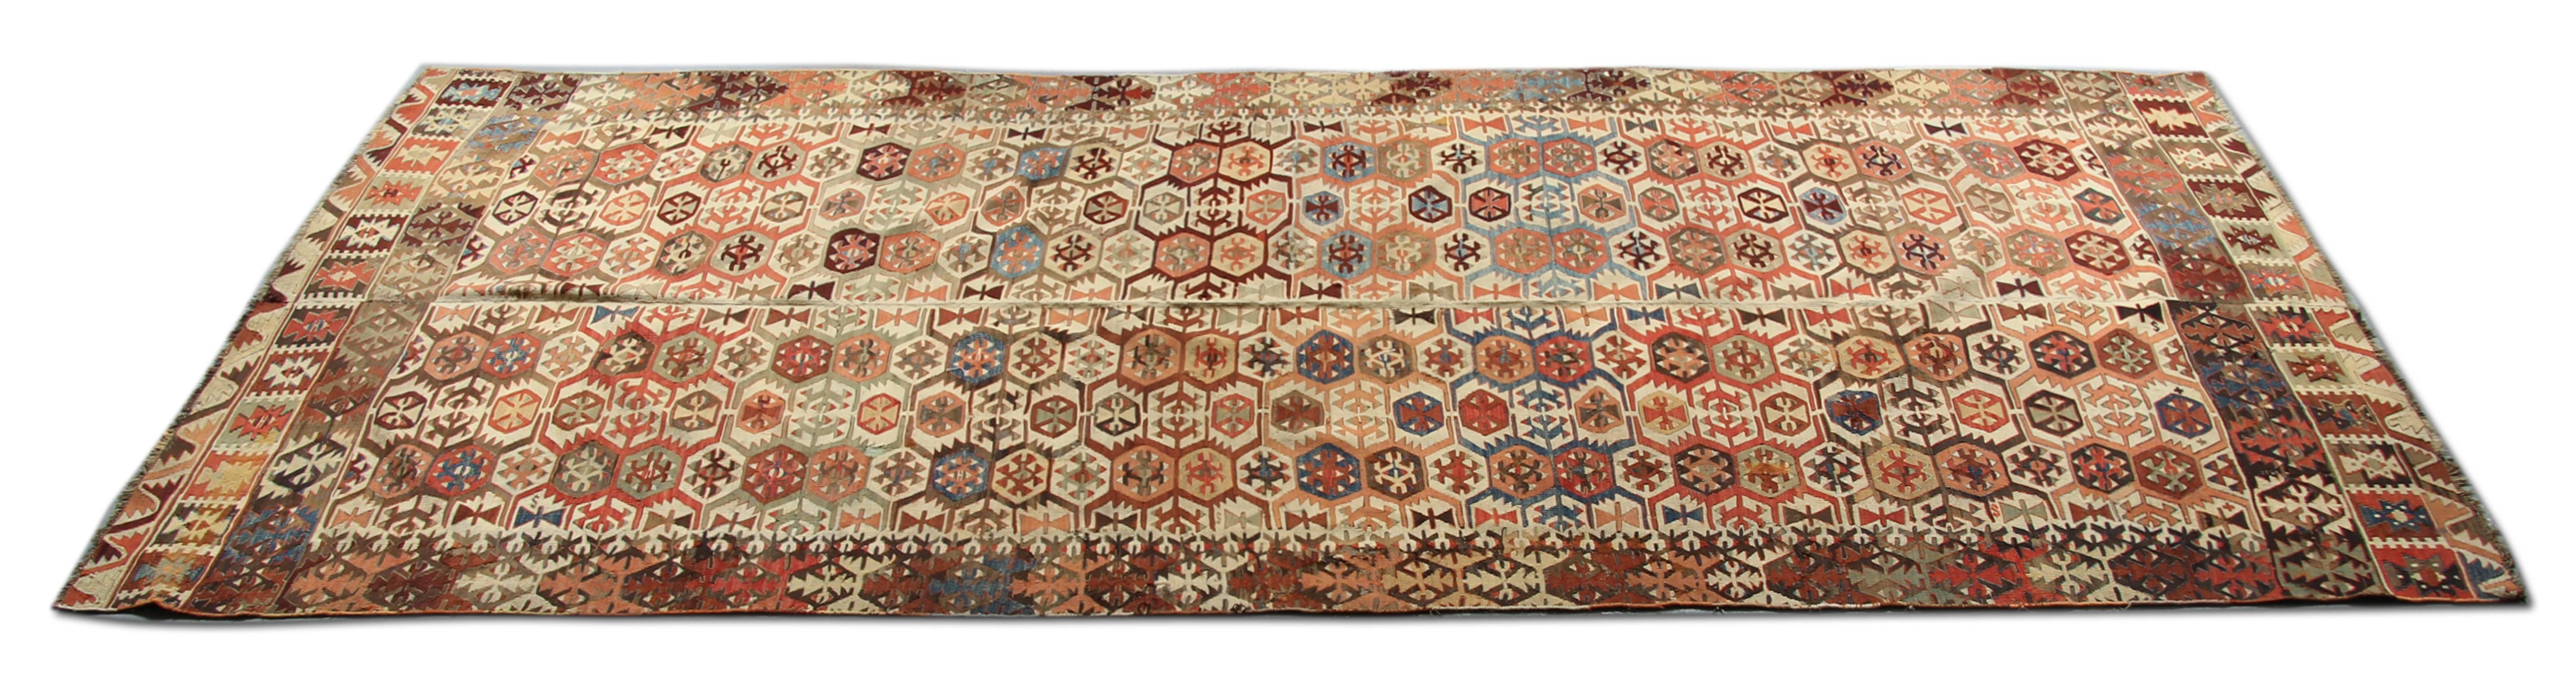 This Antique Turkish Kilim rug is from the area which is called Aydin. Aydin's location near the Mediterranean ensures its importance as a centre for trade. Unfortunately, Aydin, today is an agricultural area where weaving has ceased.  kilims of